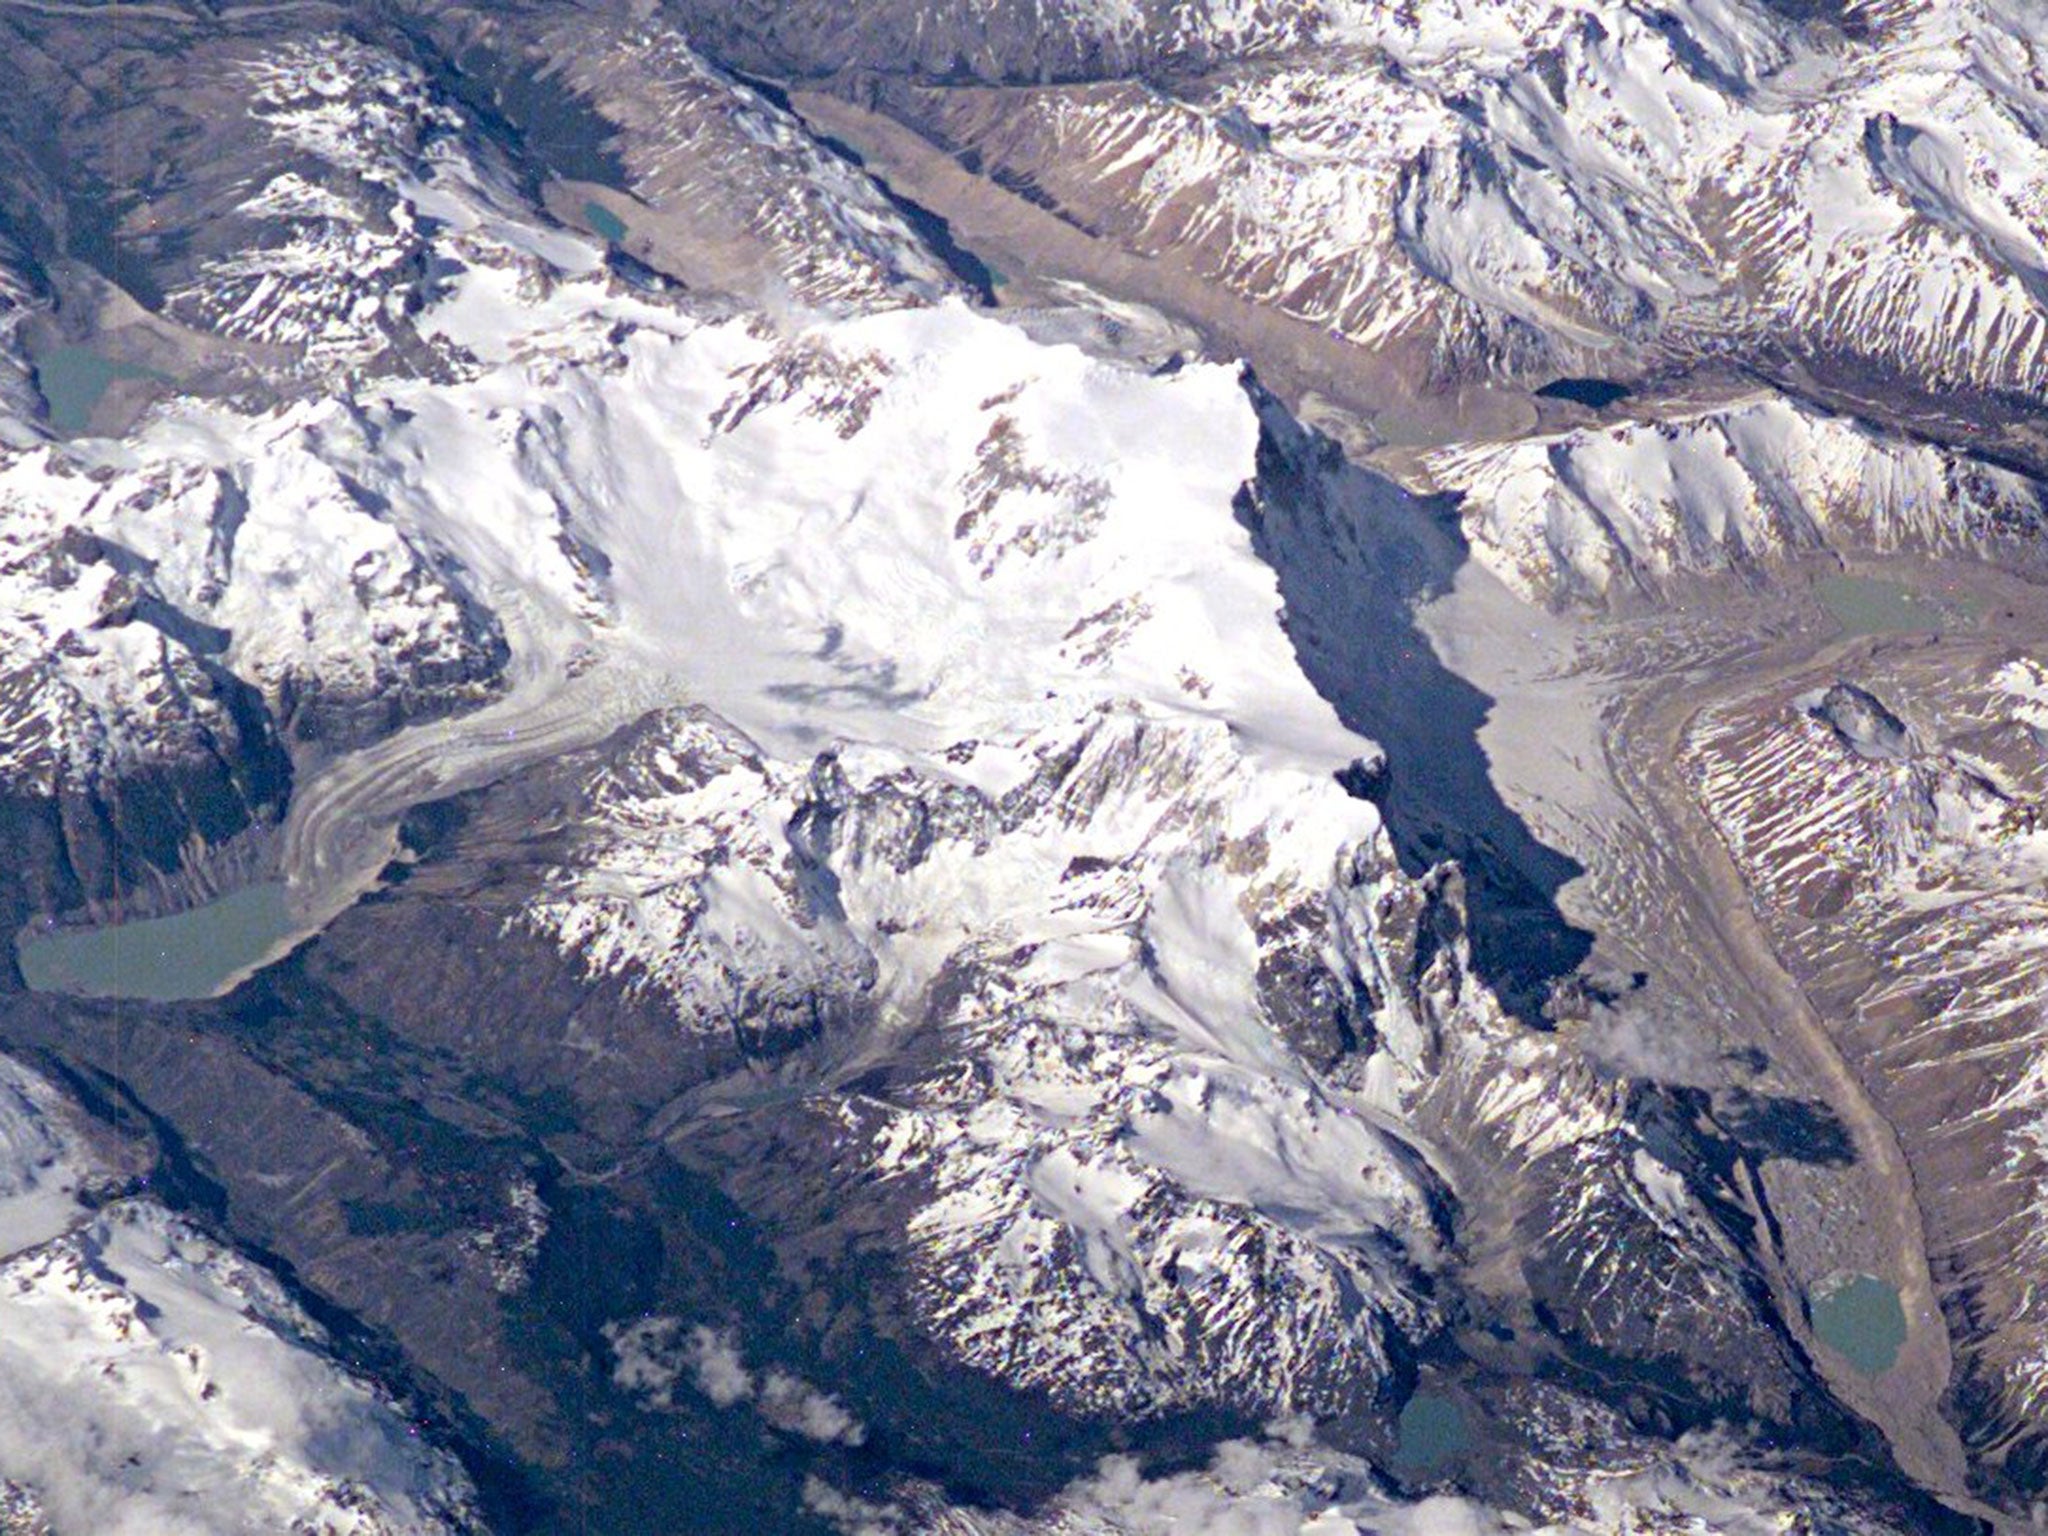 The San Lorenzo mountain, which borders Chile and Argentina